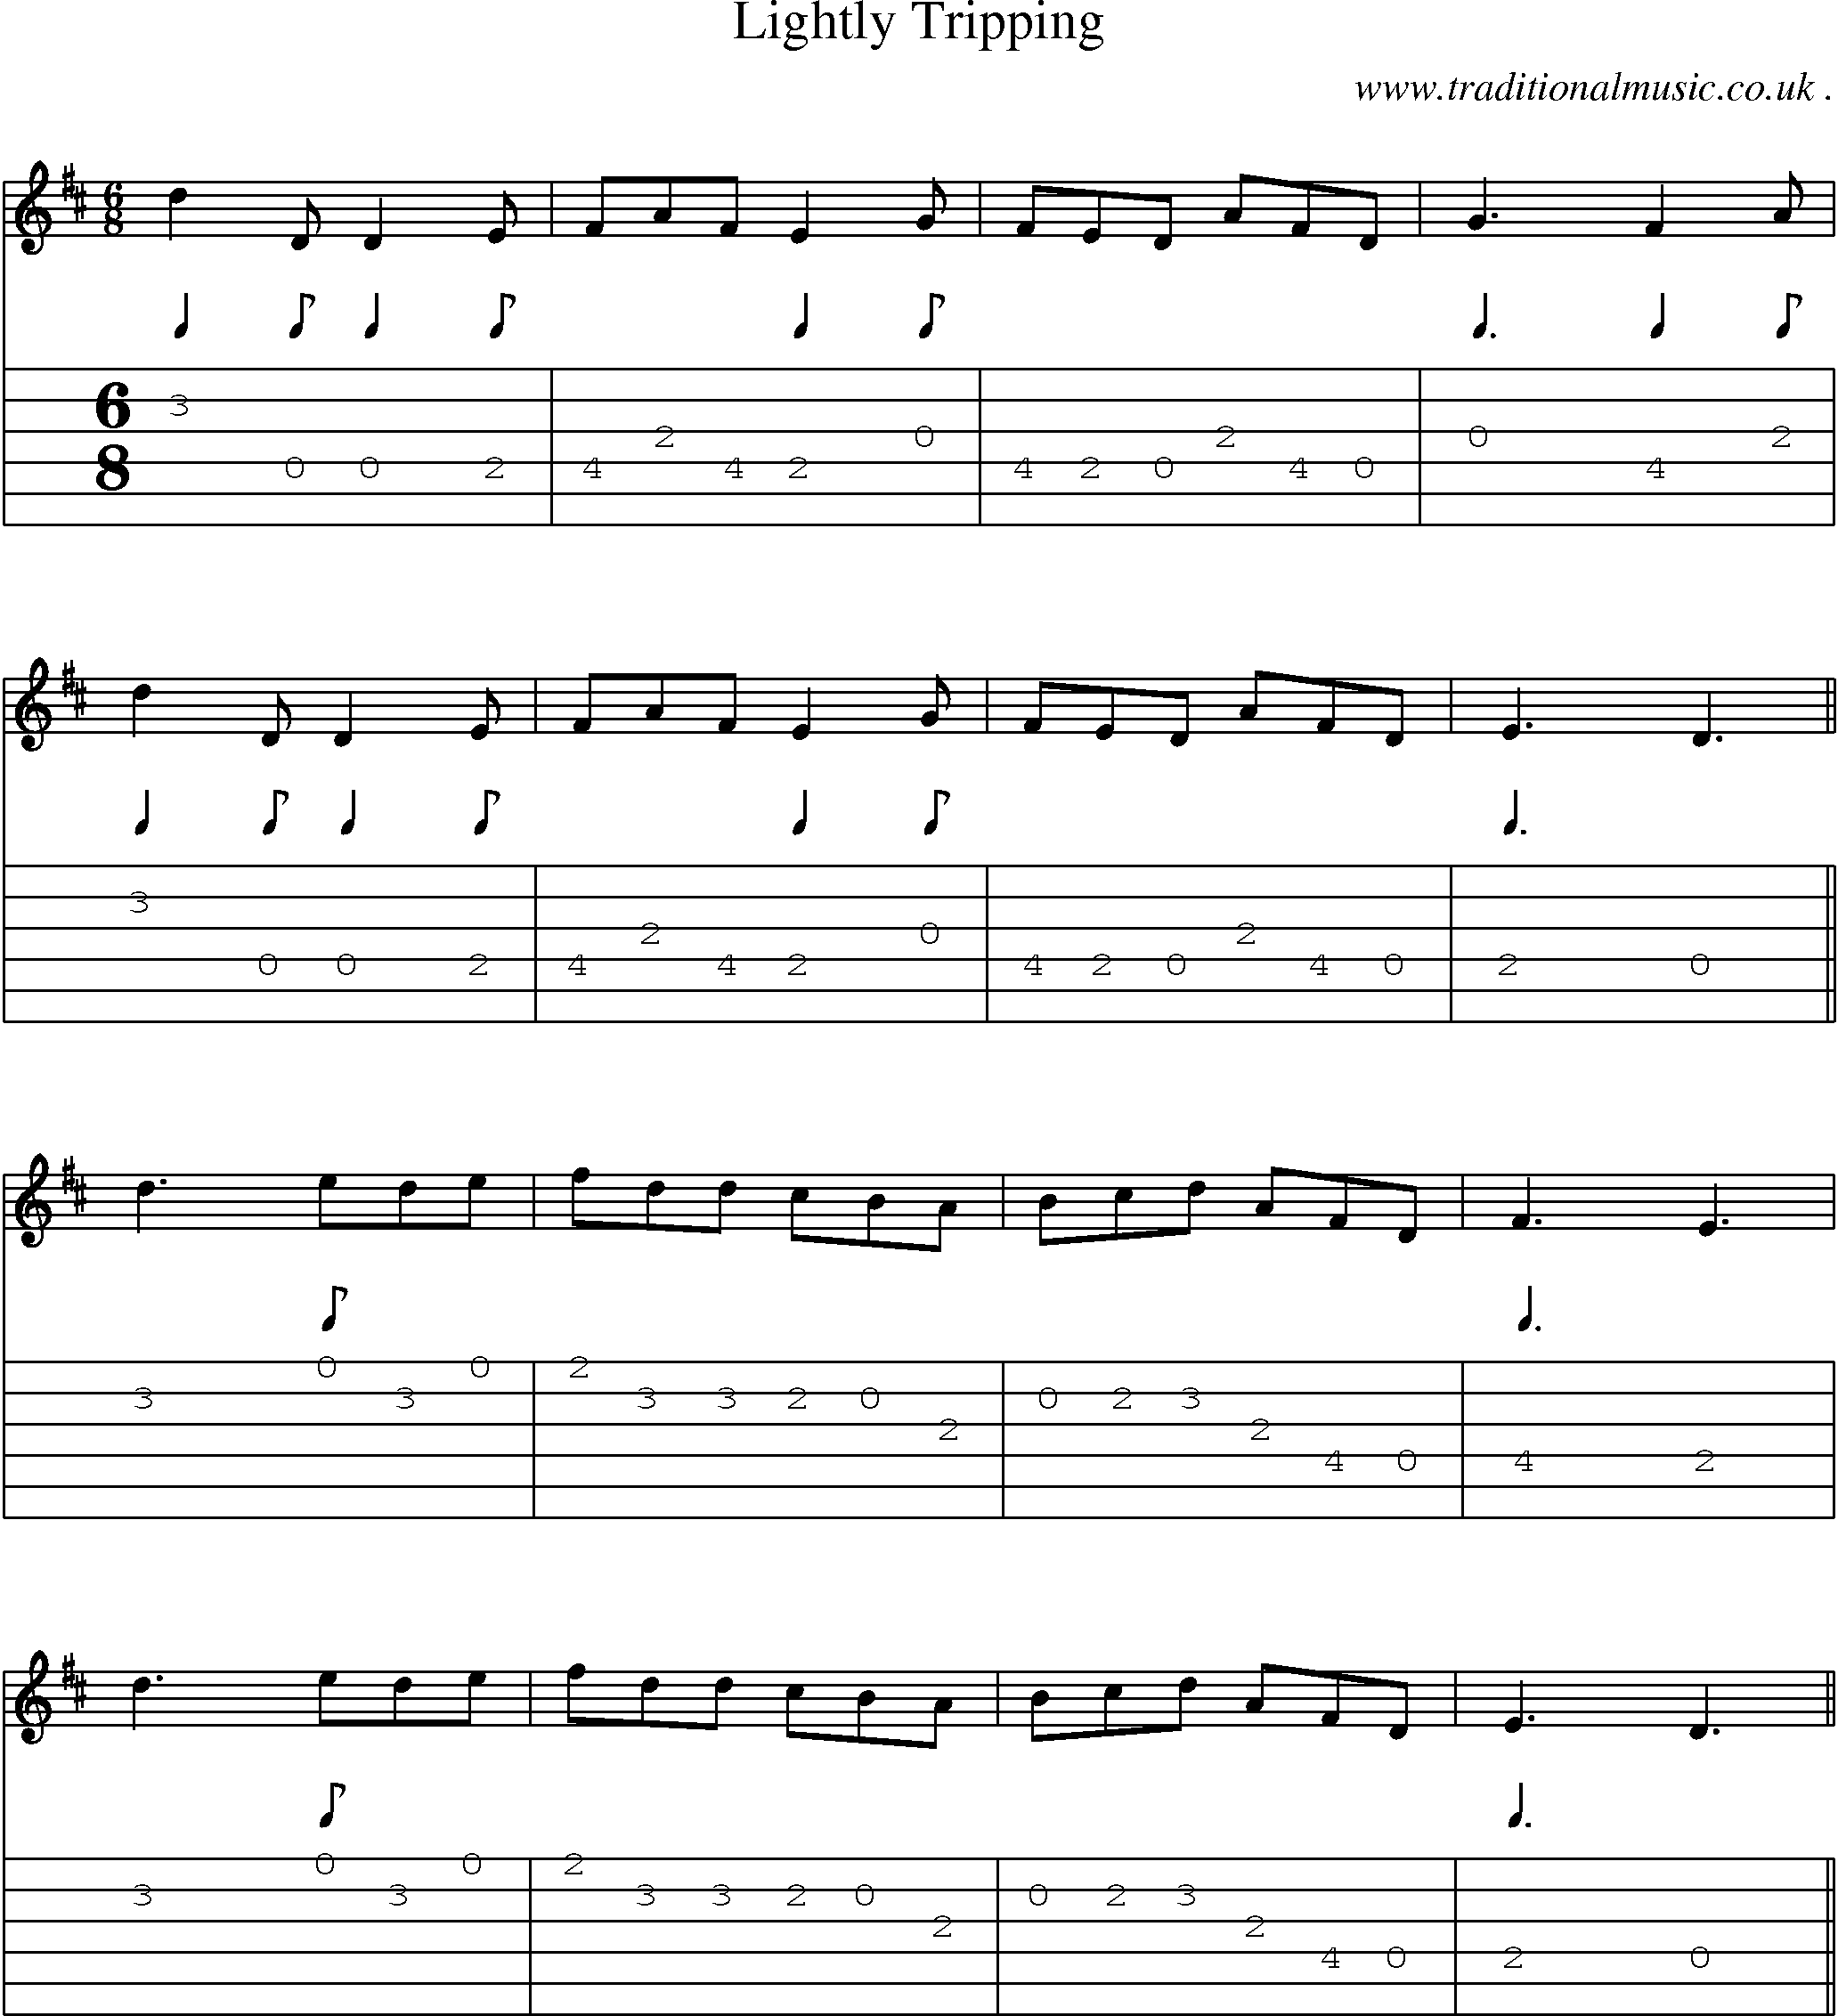 Sheet-Music and Guitar Tabs for Lightly Tripping